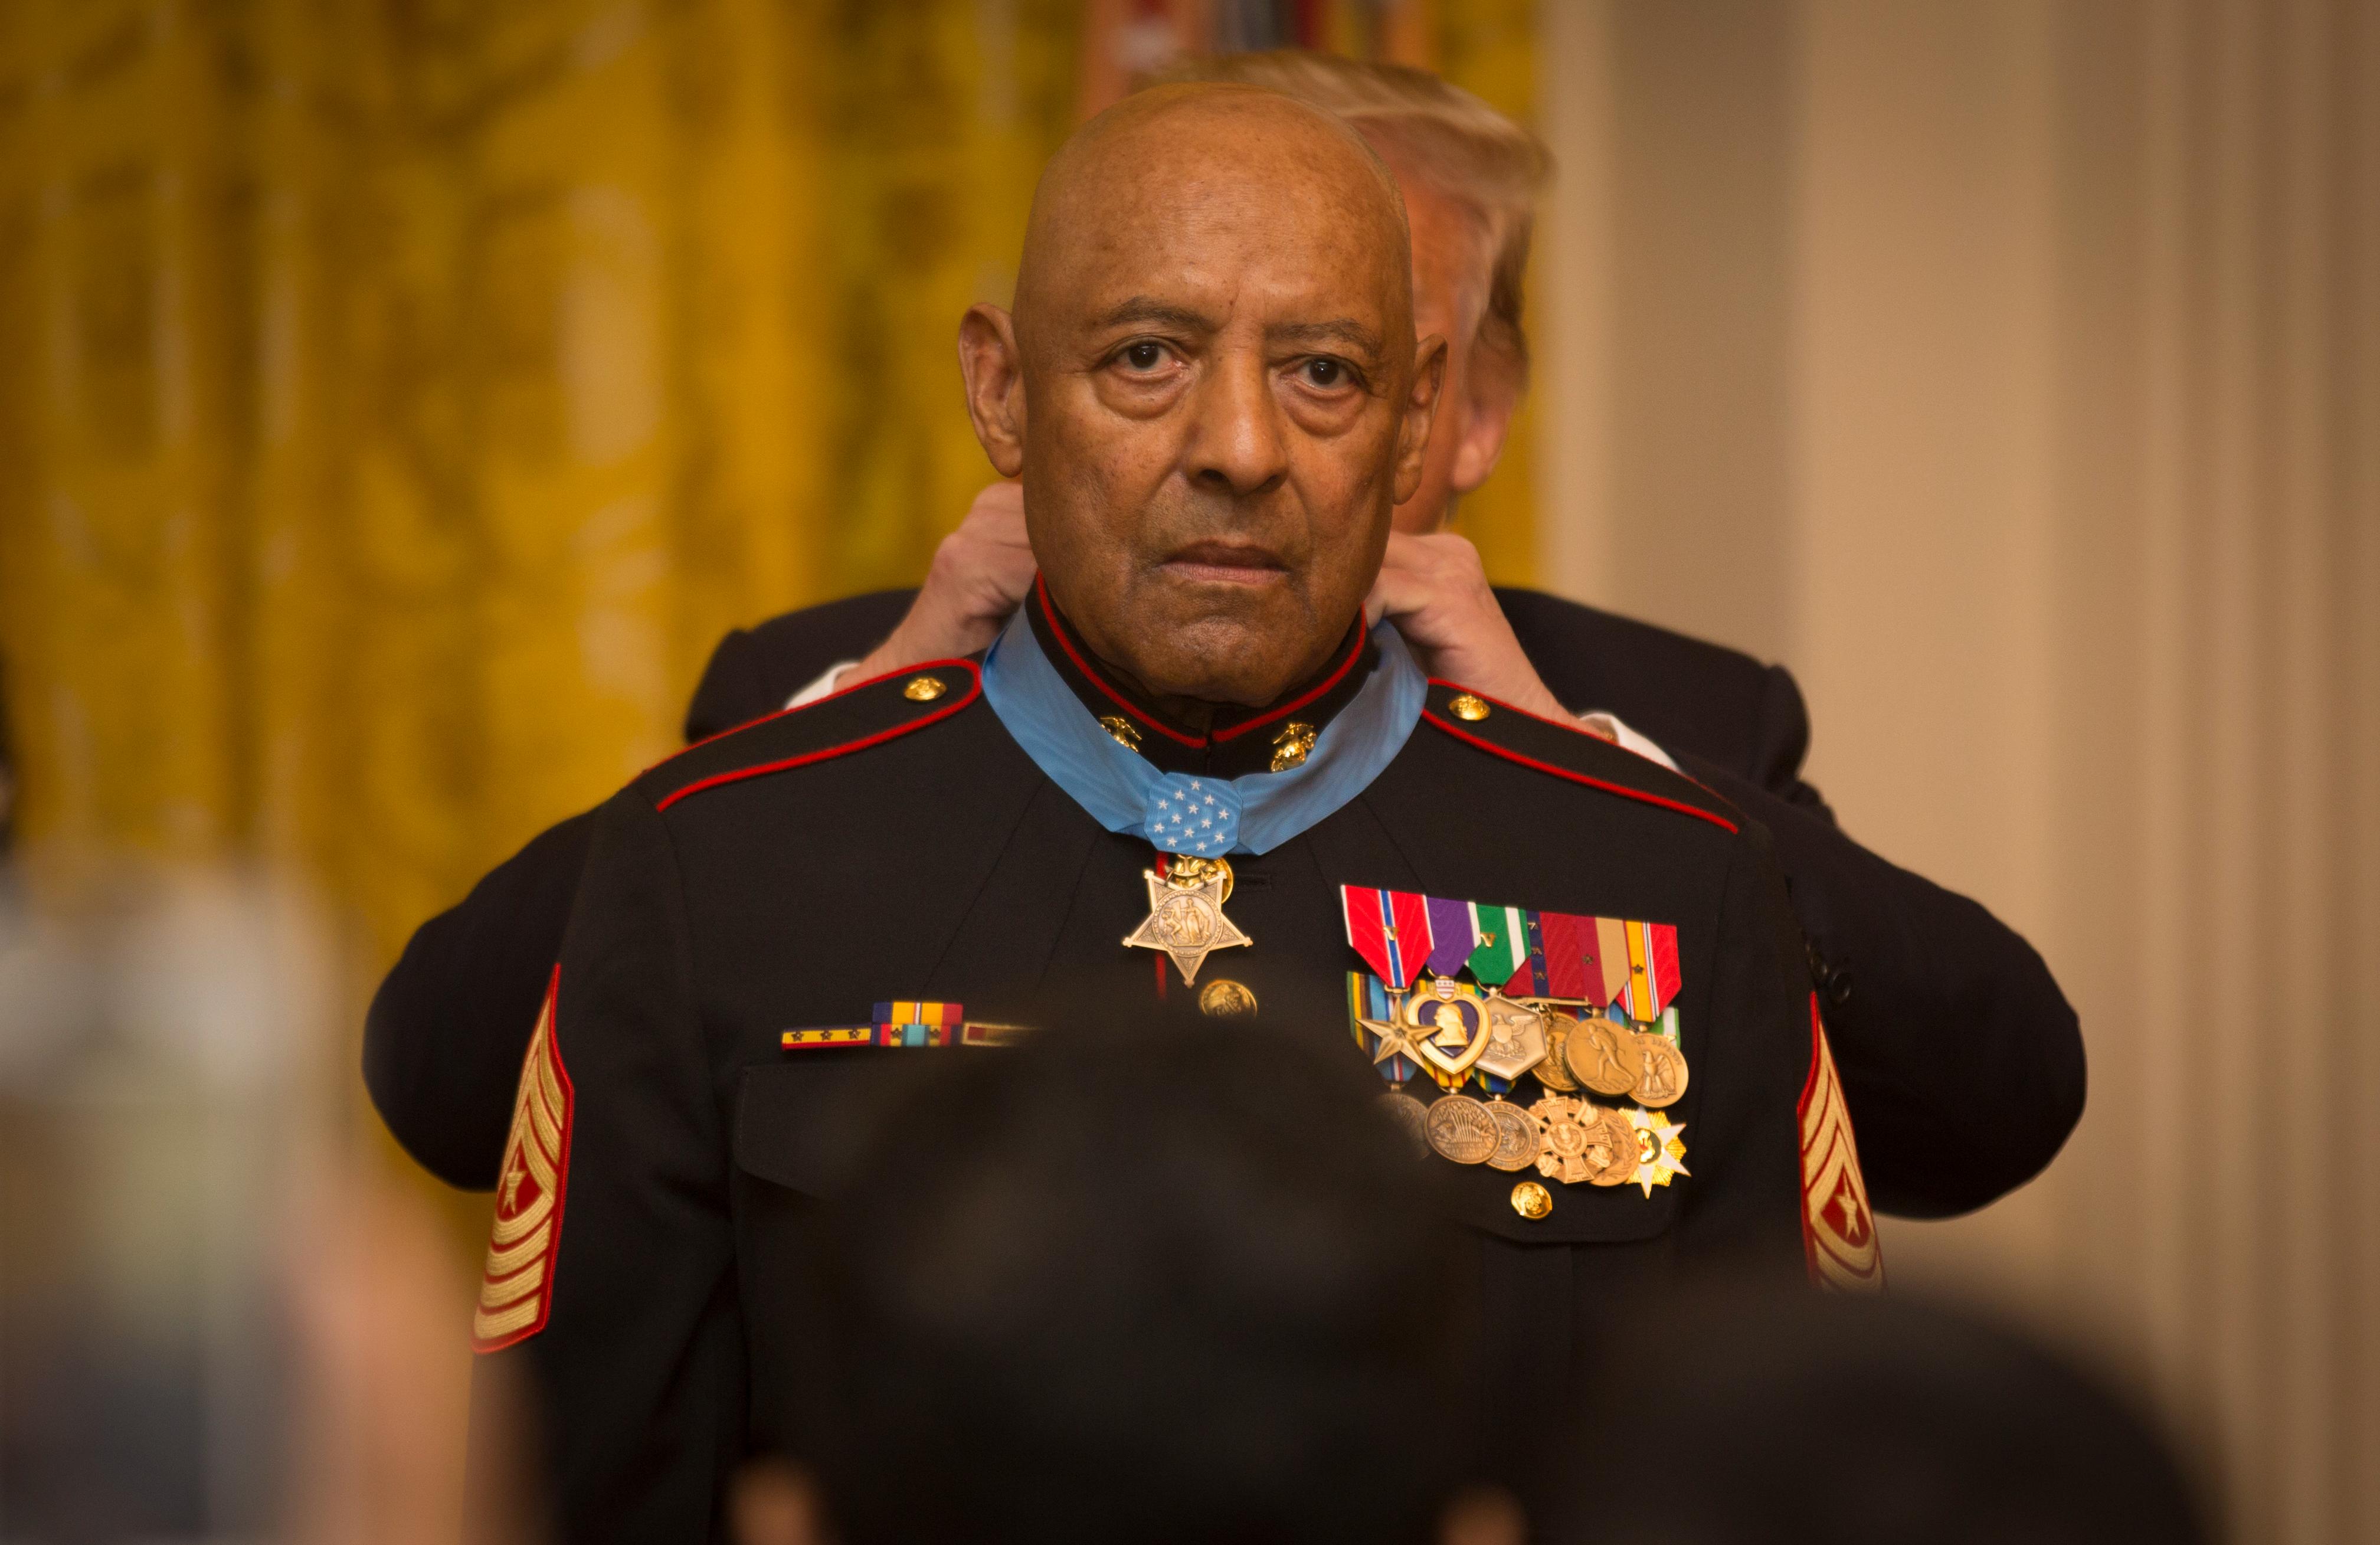 President of the United States Donald J. Trump places the Medal of Honor around retired U.S. Marine Corps Sgt. Maj. John L. Canley's neck, the 298th Marine Medal of Honor recipient, at the White House in Washington, D.C., Oct. 17, 2018. From Jan. 31, to Feb. 6, 1968